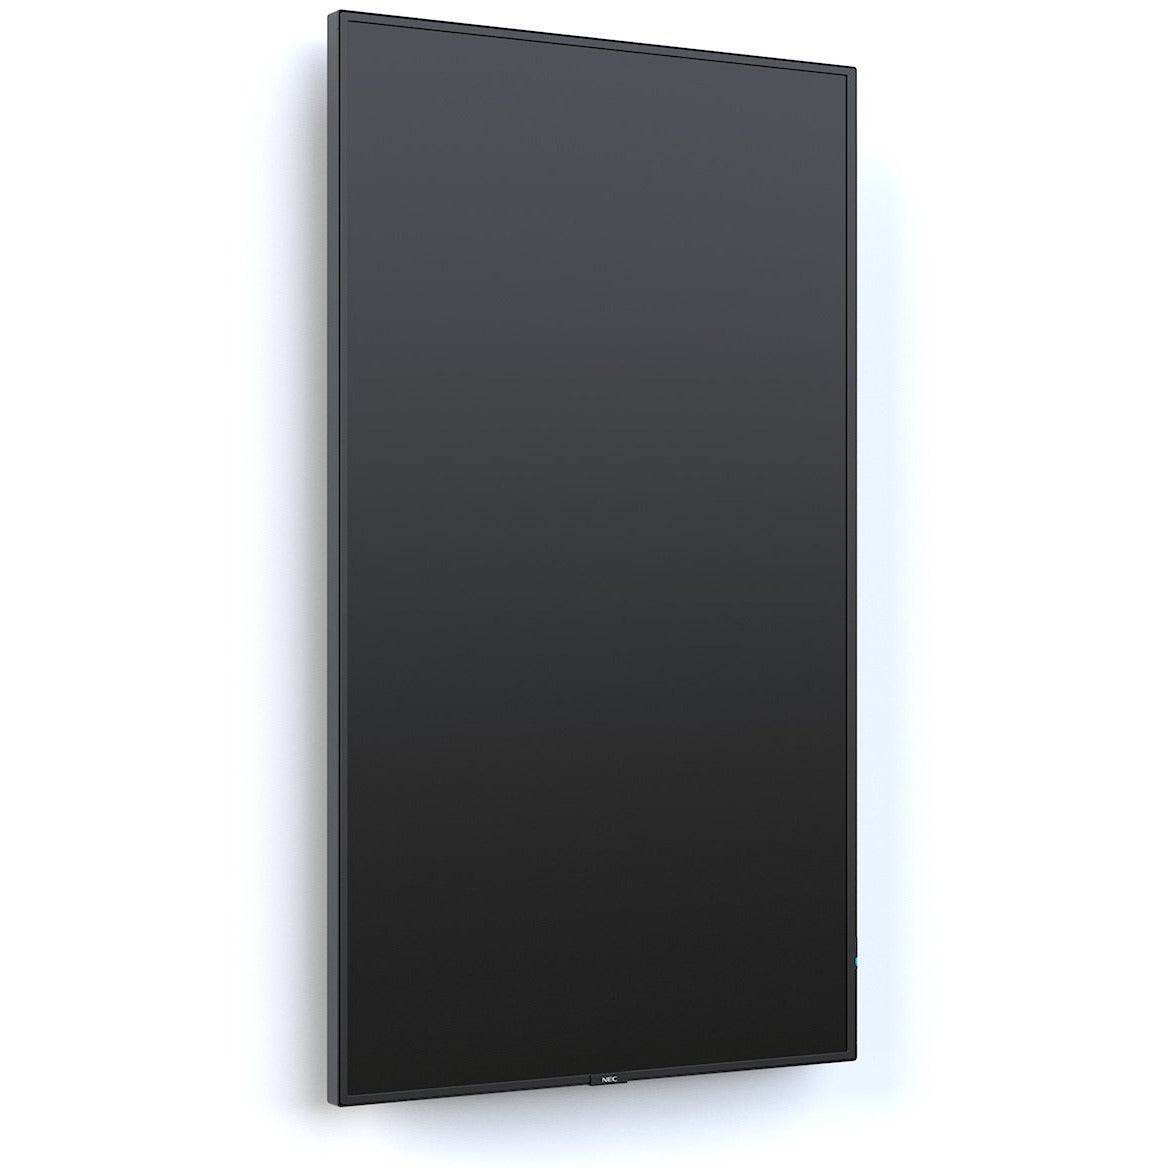 NEC MultiSync® M551 LCD 55" Message Large Format Display